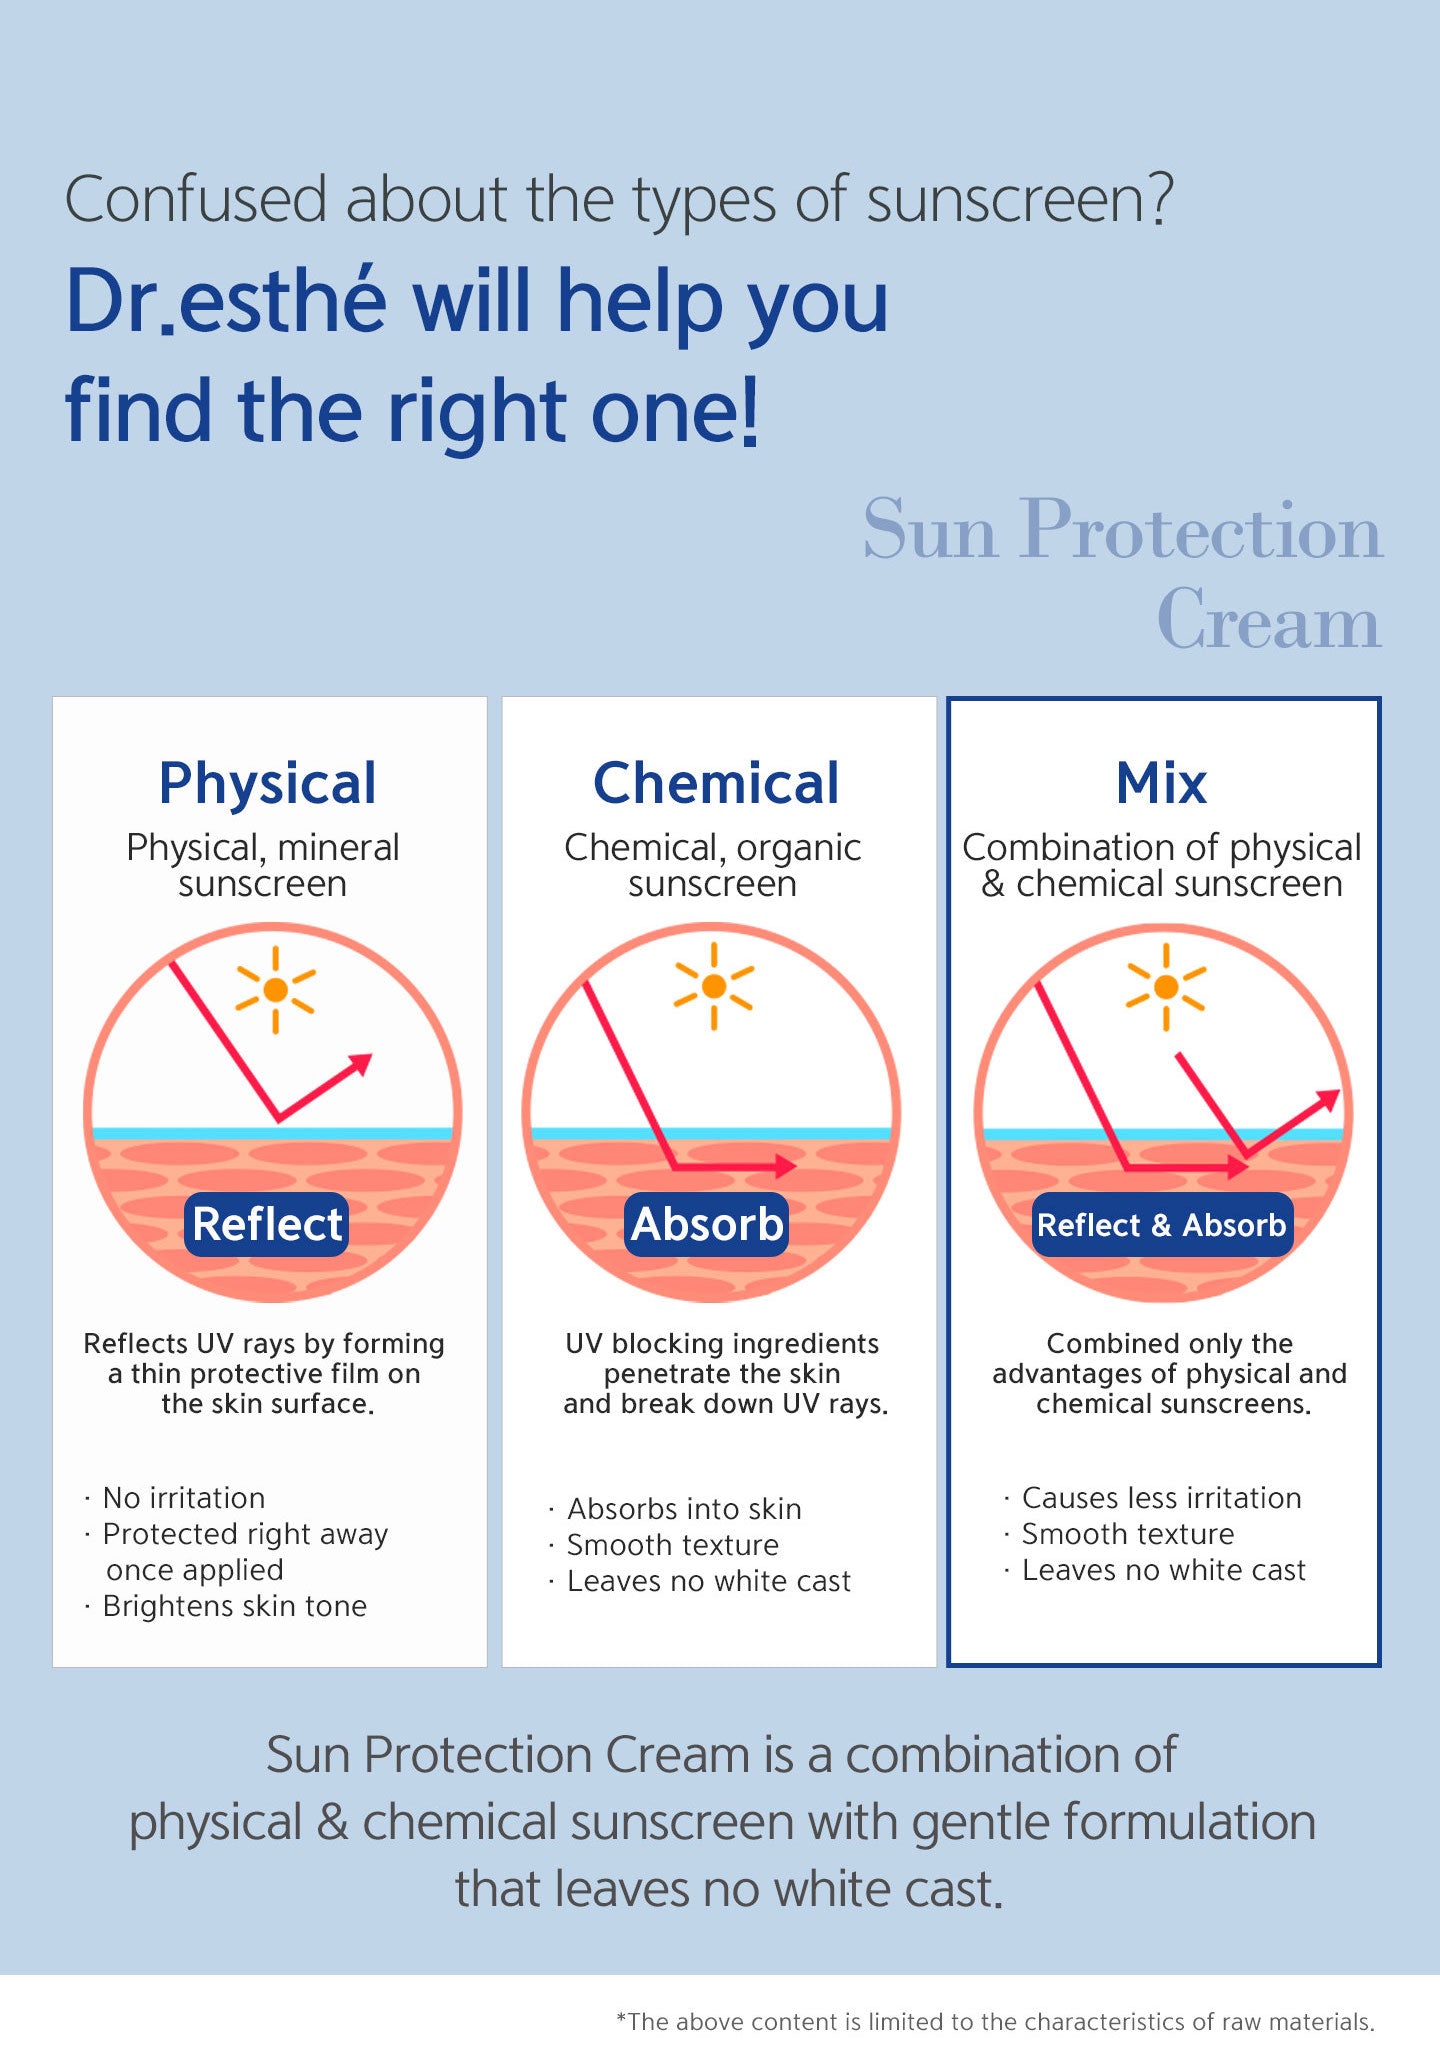 Physical, mineral sunscreen reflects UV rays by forming a thin protective film on the skin surface. Chemical, organic sunscreen with UV blocking ingredients penetrate the skin and break down UV rays. Combination of the advantages of both. 